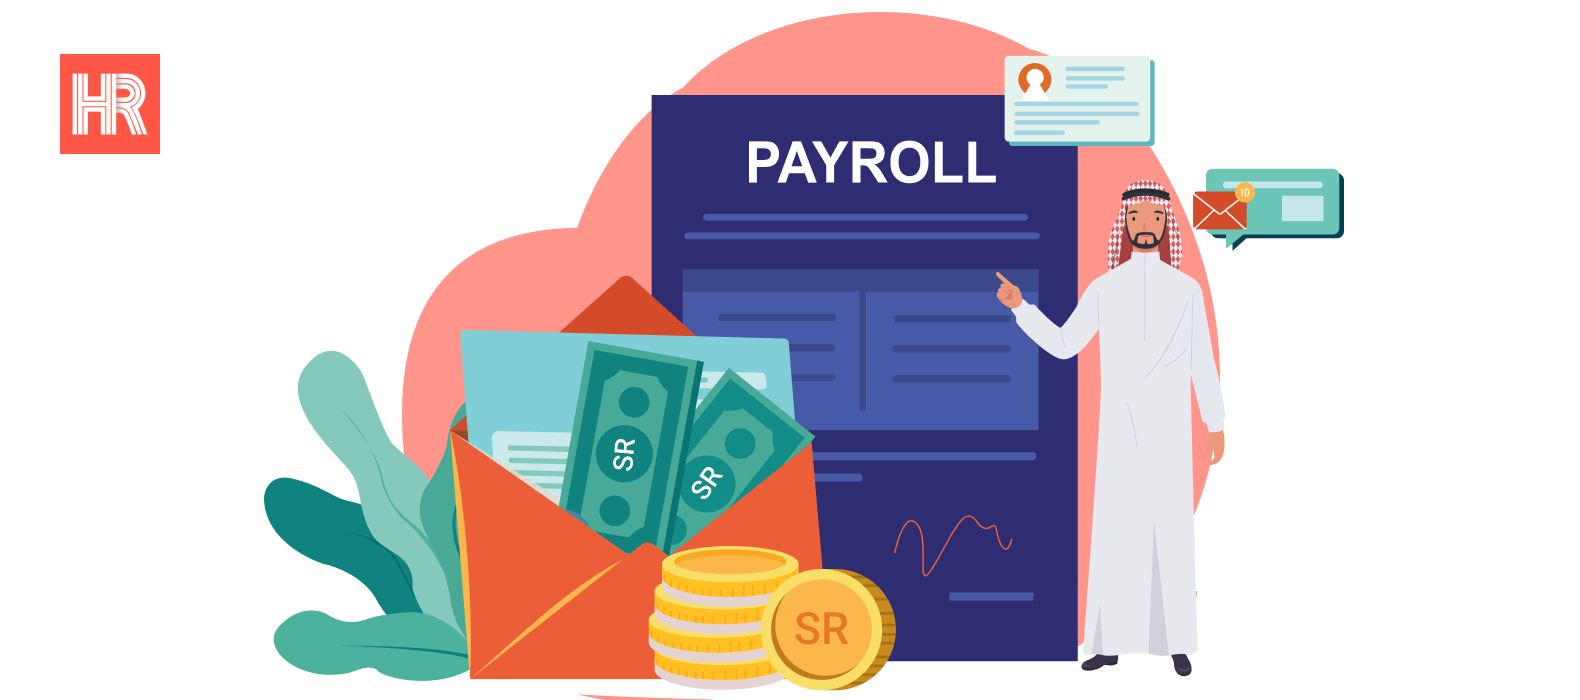 What is Payroll management in HR